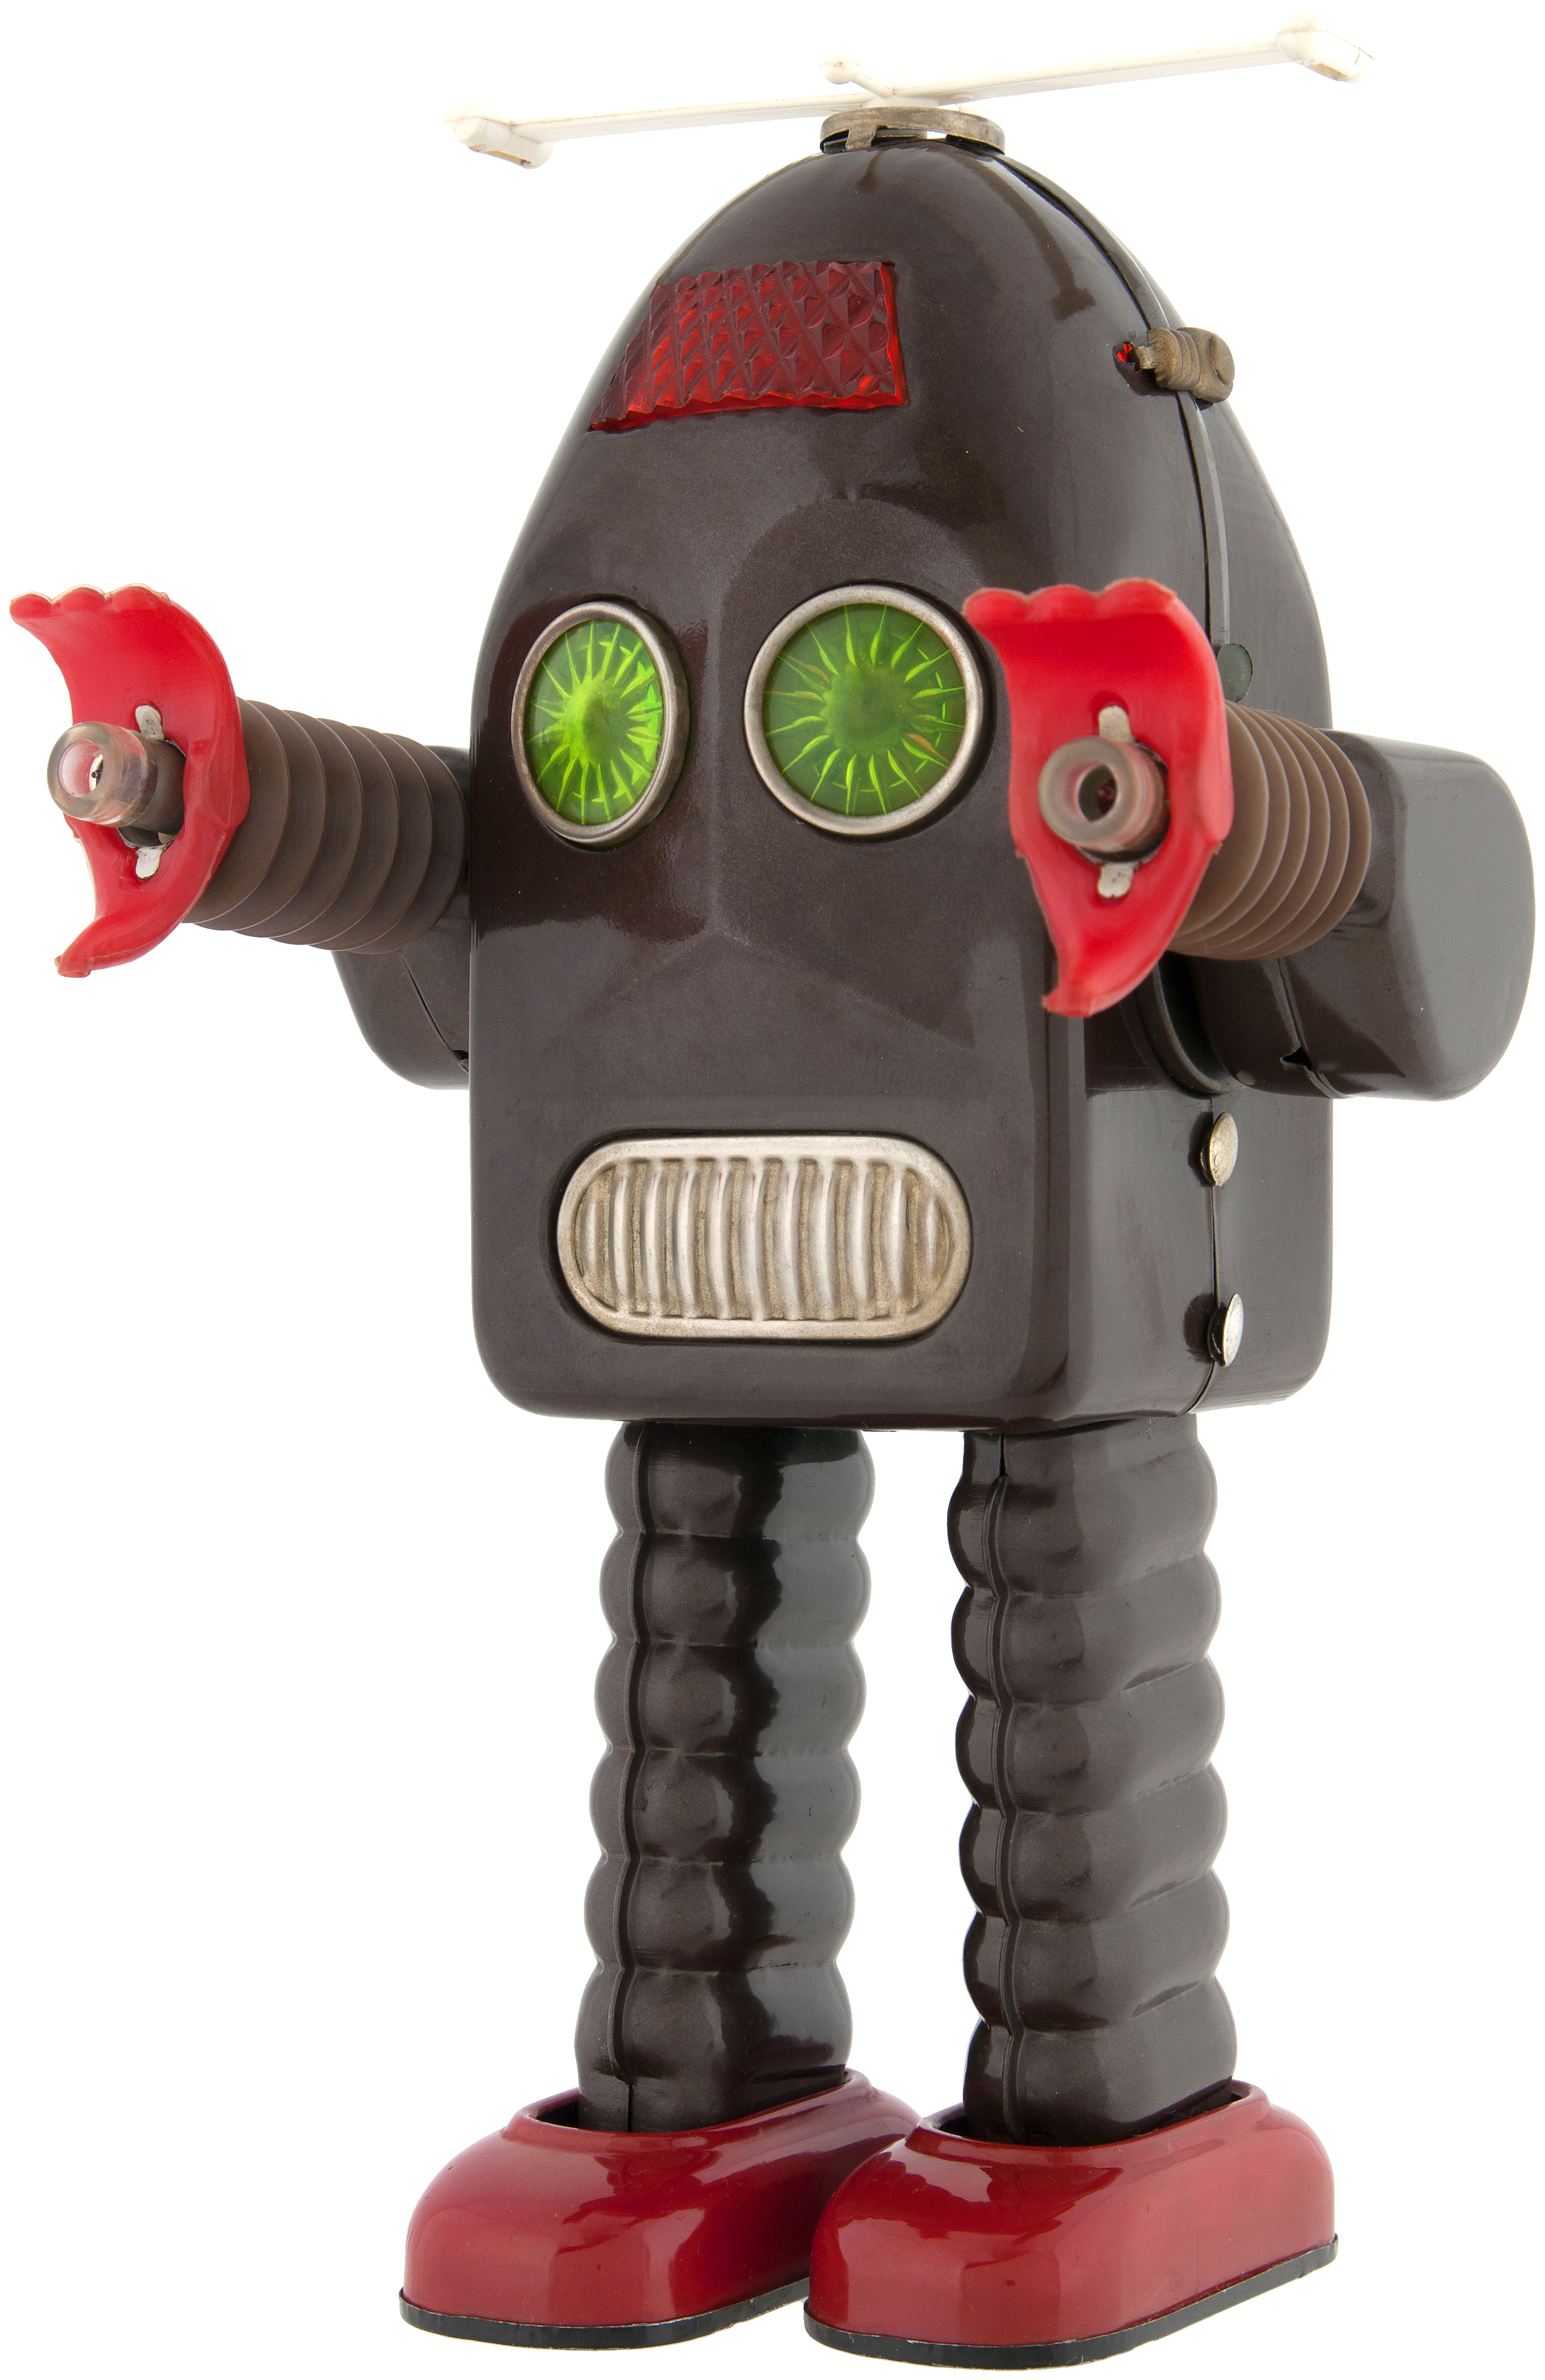 klipning solo omvendt Hake's - "THUNDER ROBOT" BOXED BATTERY-OPERATED TOY.